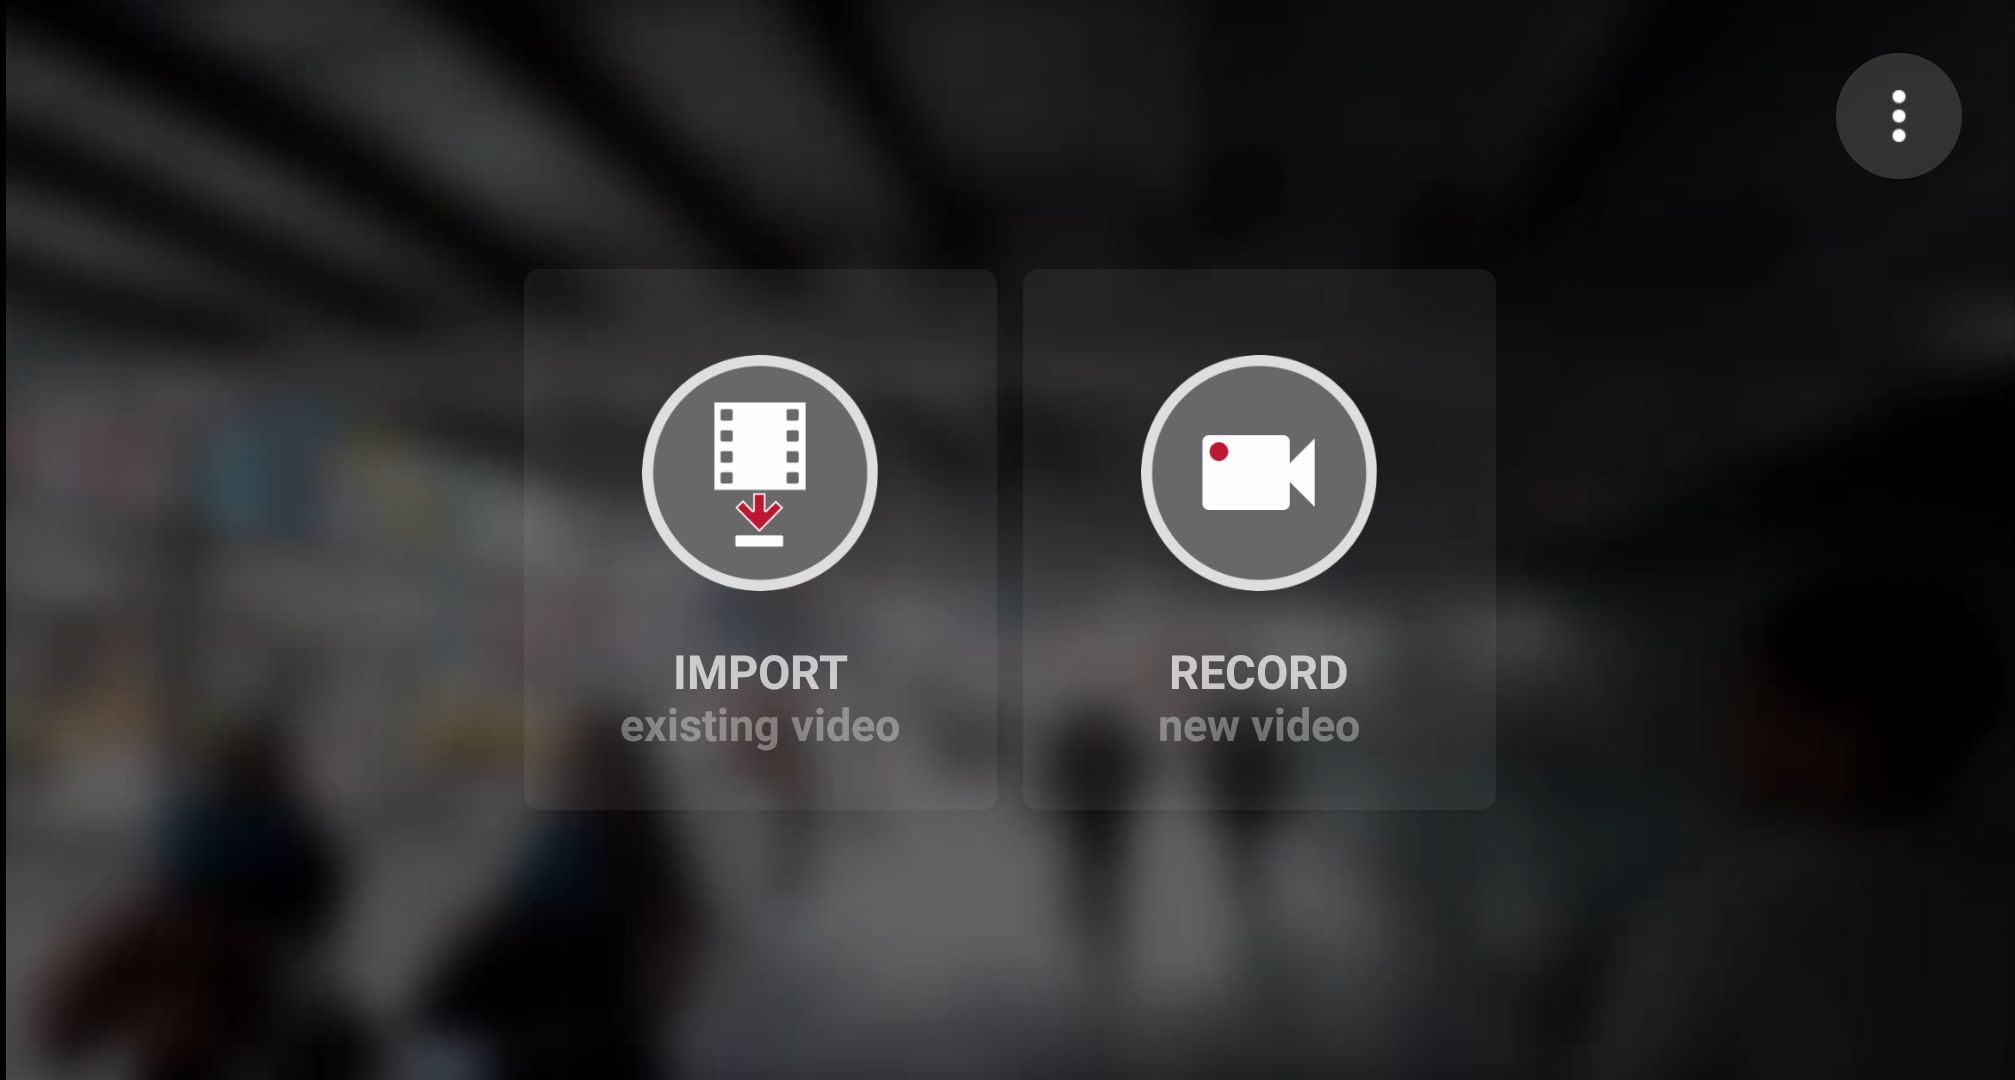 Microsoft Hyperlapse Mobile App Record and Import Options